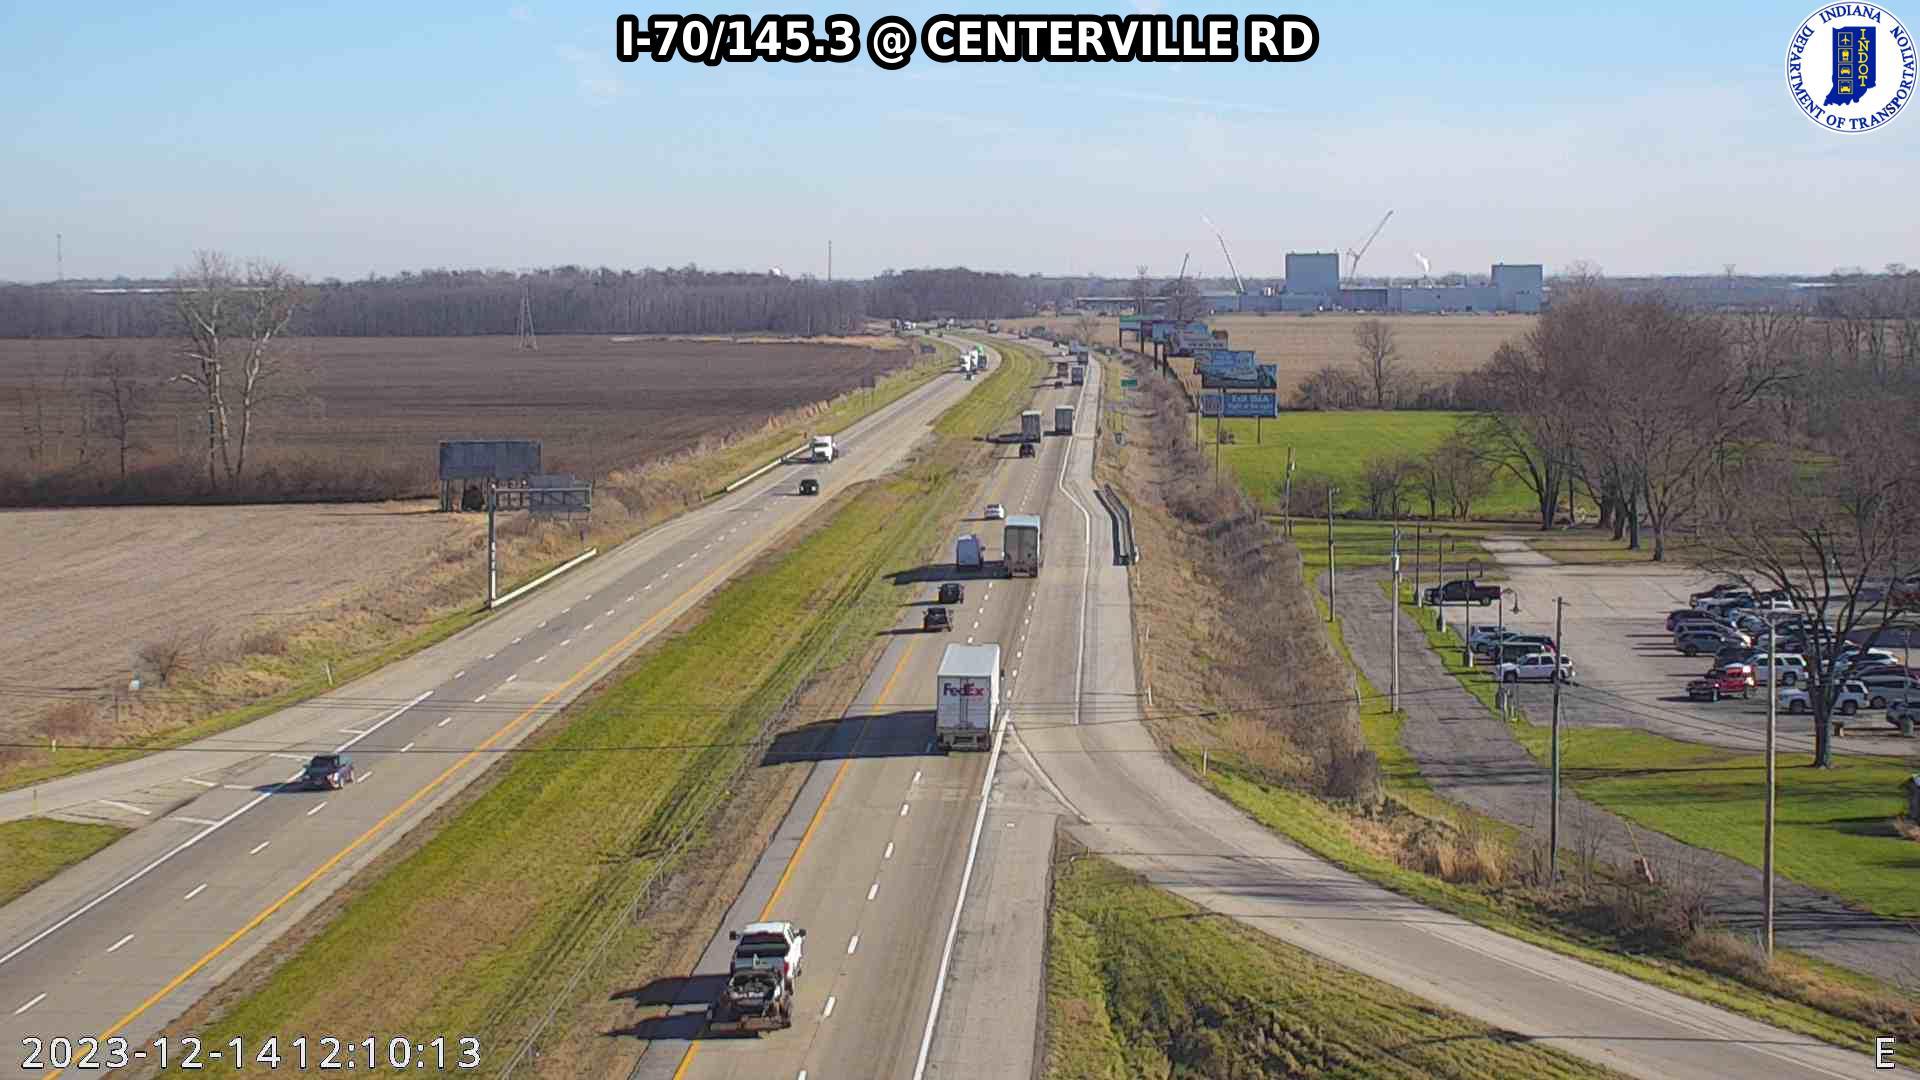 Traffic Cam West Grove: I-70: I-70/145.3 @ CENTERVILLE RD Player